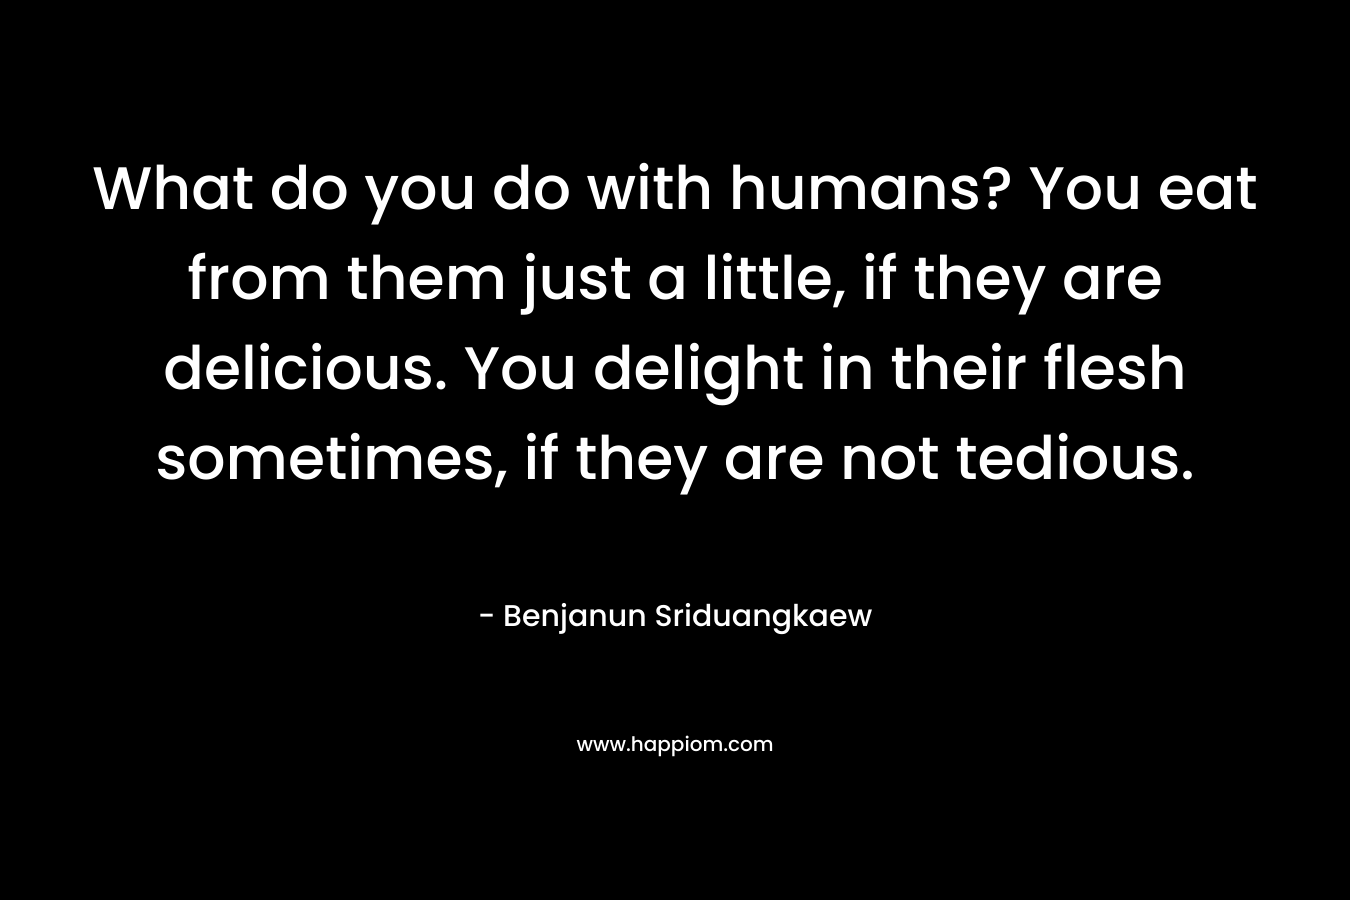 What do you do with humans? You eat from them just a little, if they are delicious. You delight in their flesh sometimes, if they are not tedious. – Benjanun Sriduangkaew